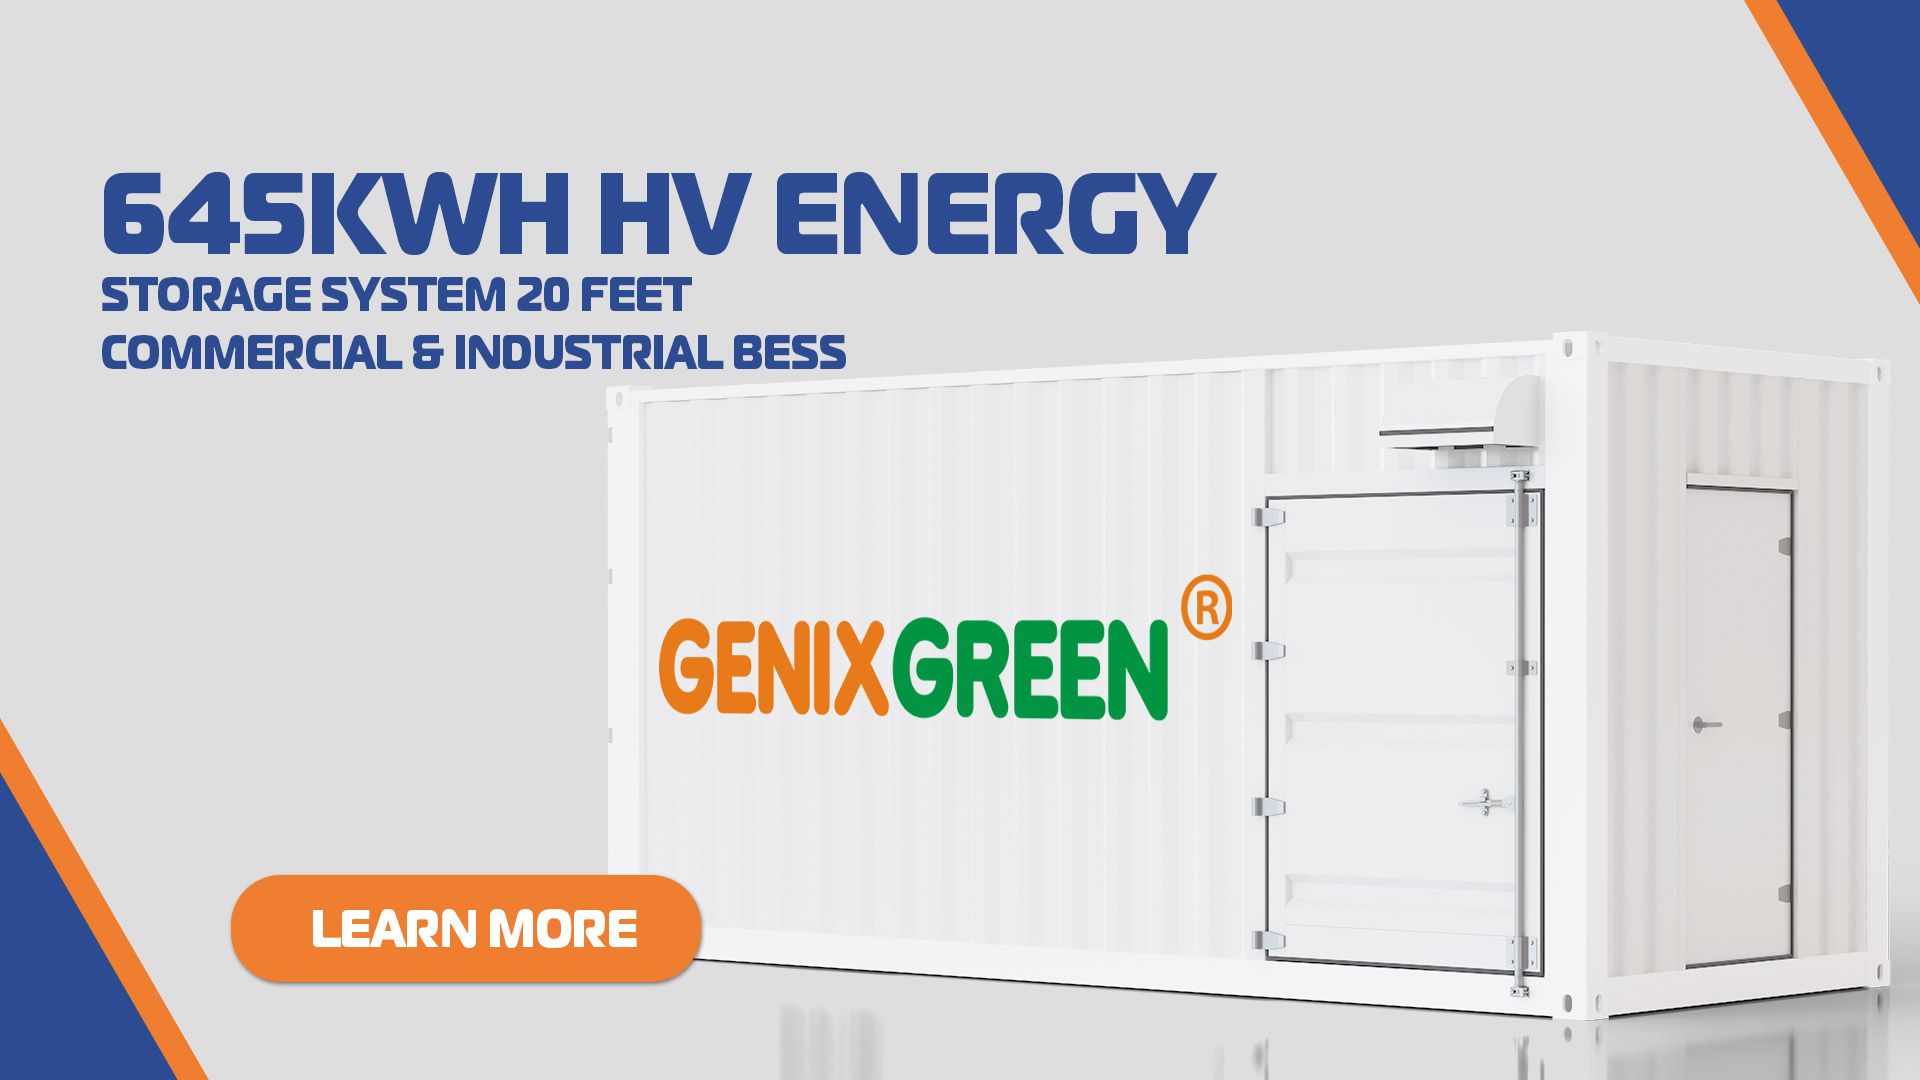 Commercial Energy Storage Solutions: GenixGreen Containerized System Review and Solution